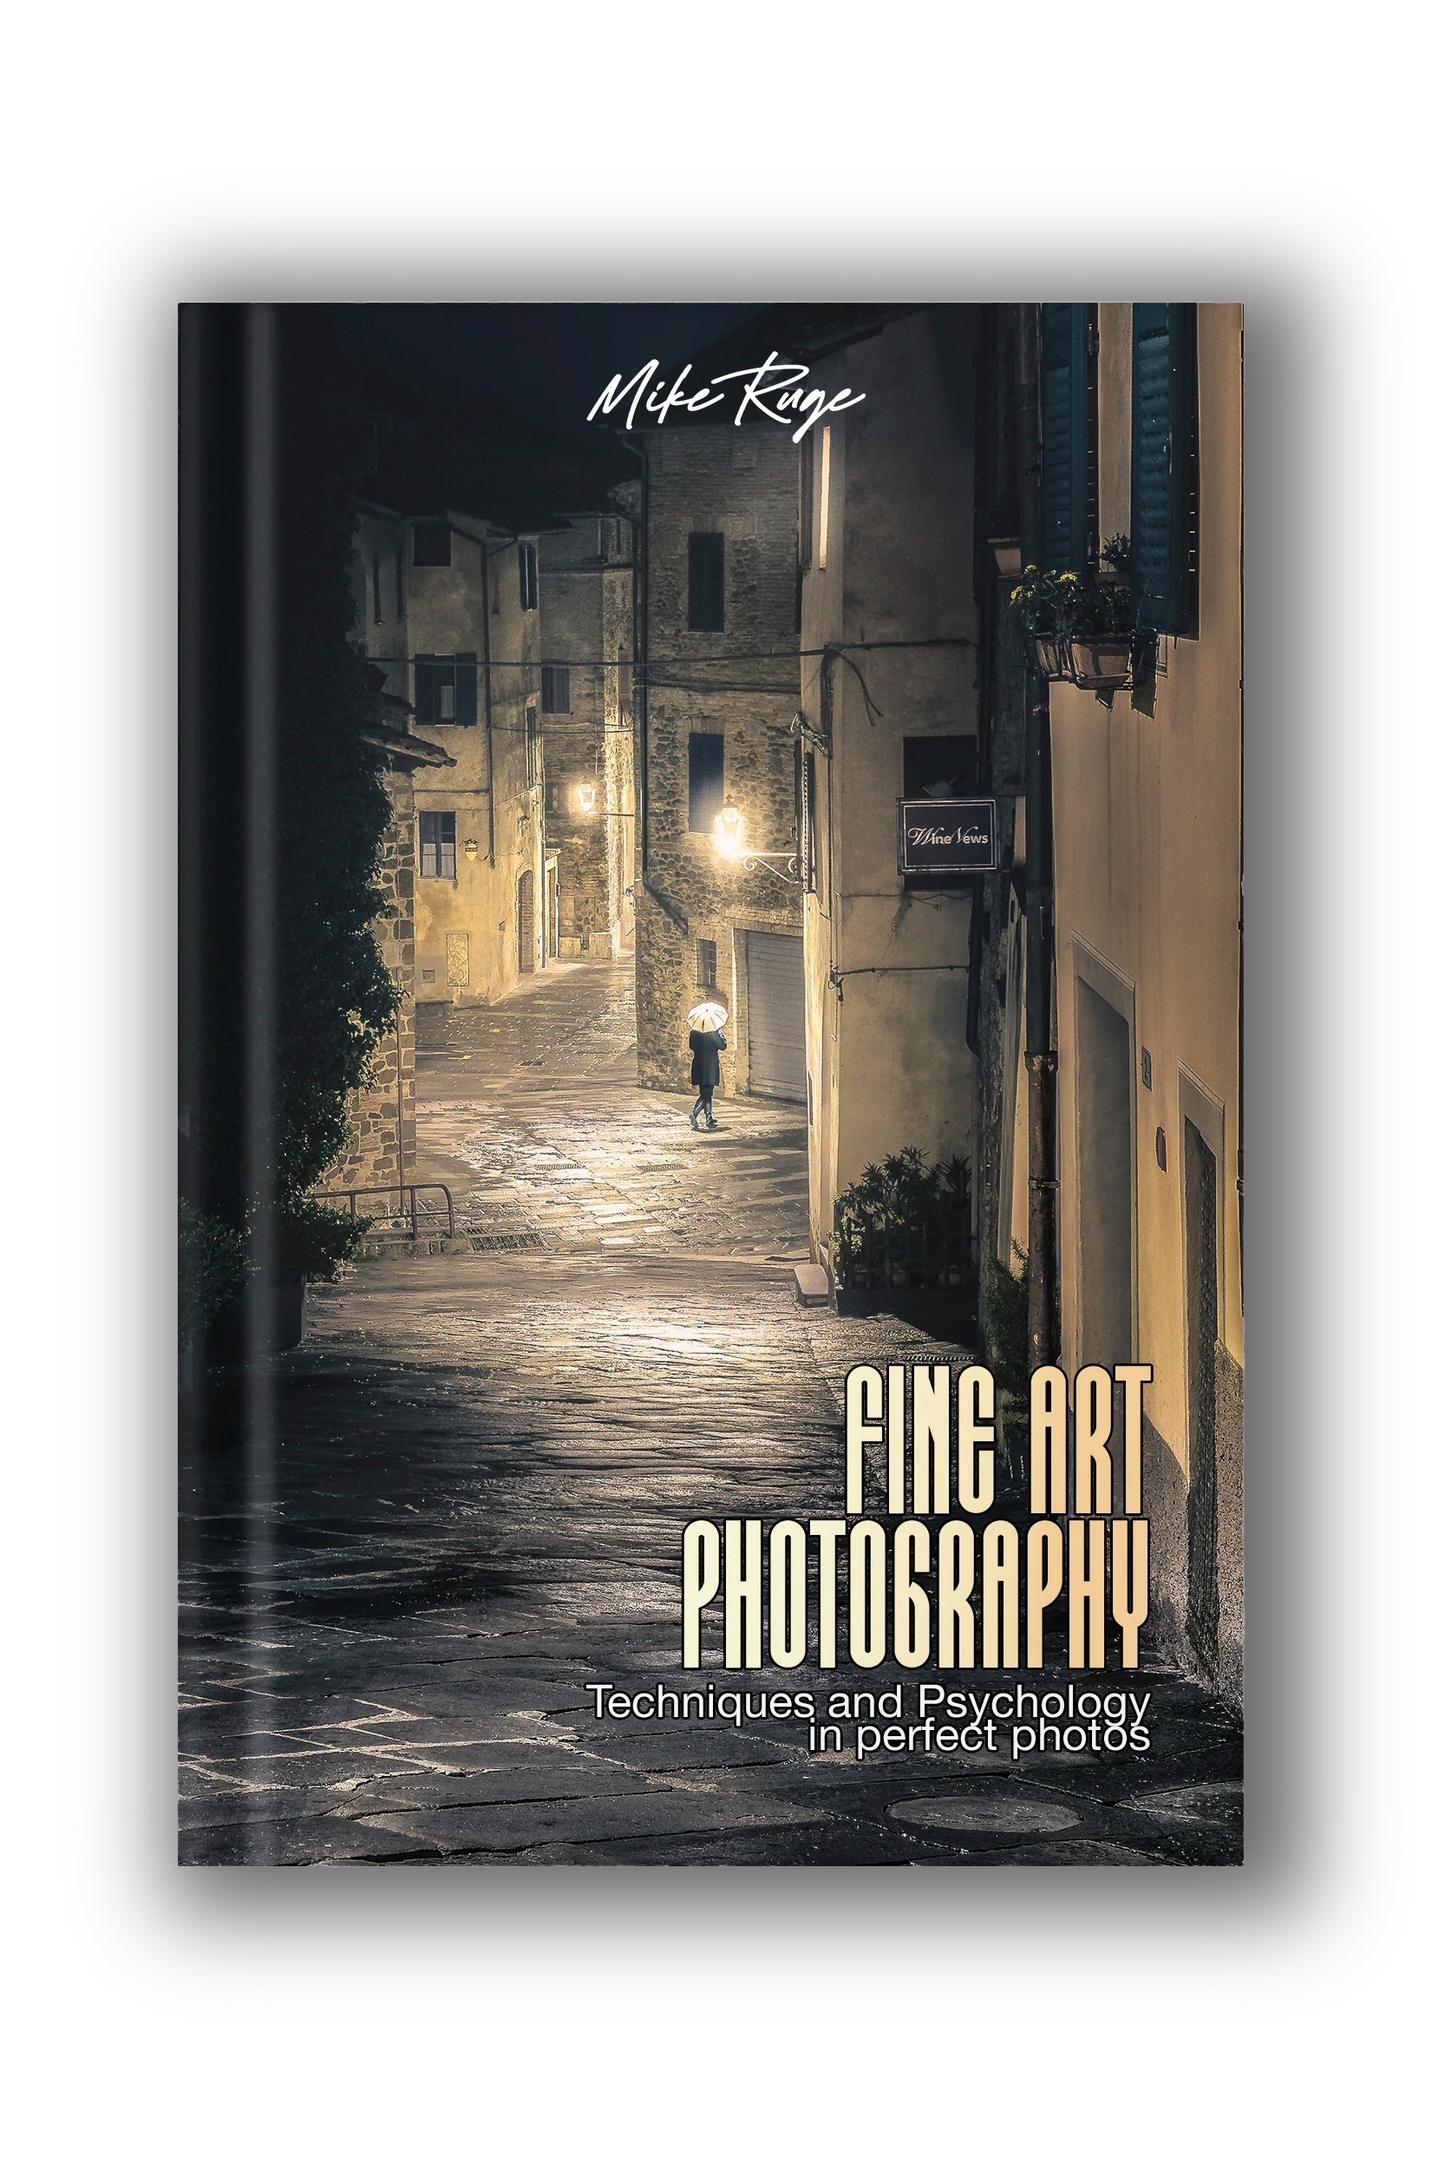 FINE ART PHOTOGRAPHY - Techniques and Psychology in perfect photos - ENG/ITA EBOOK